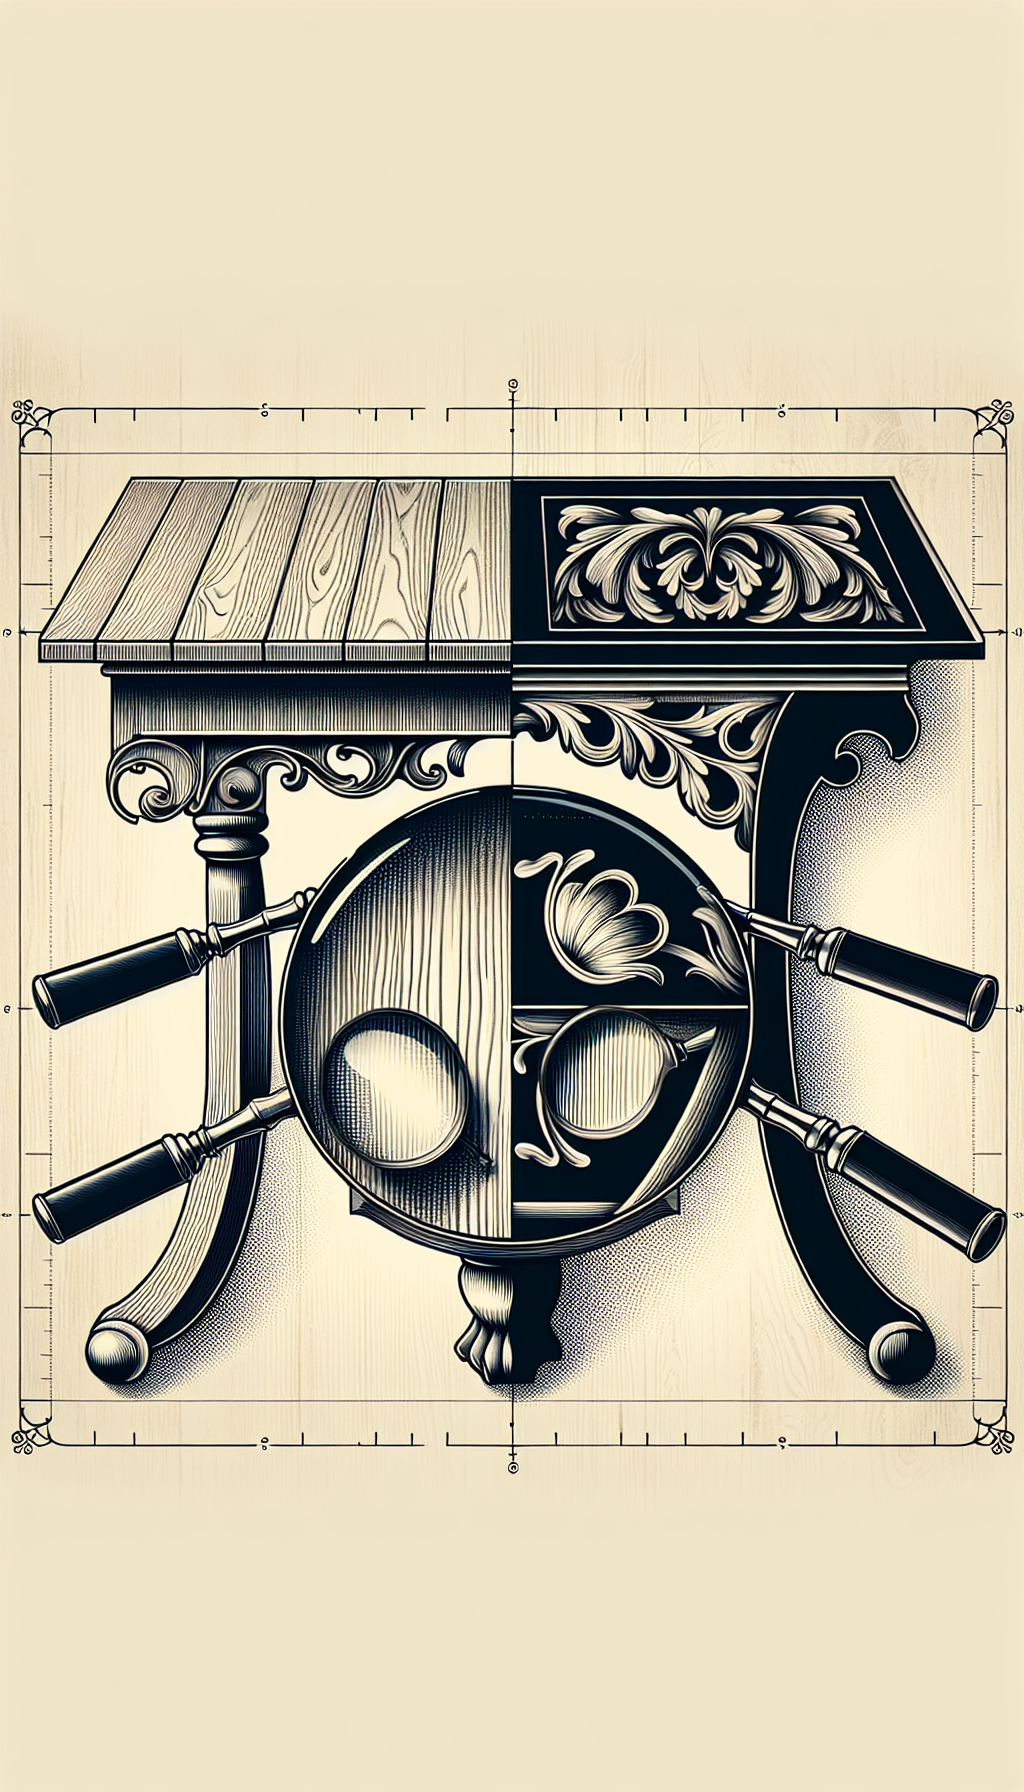 An elegant illustration depicts half of a trestle and half of a gate-leg table, seamlessly merging at the center. Above the tables float magnifying glasses, each highlighting unique period features like claw-and-ball feet or intricately carved motifs. The background subtly transitions from an antique wood grain texture to a sleek, modern gradient, symbolizing the evolution of style and strength through time.